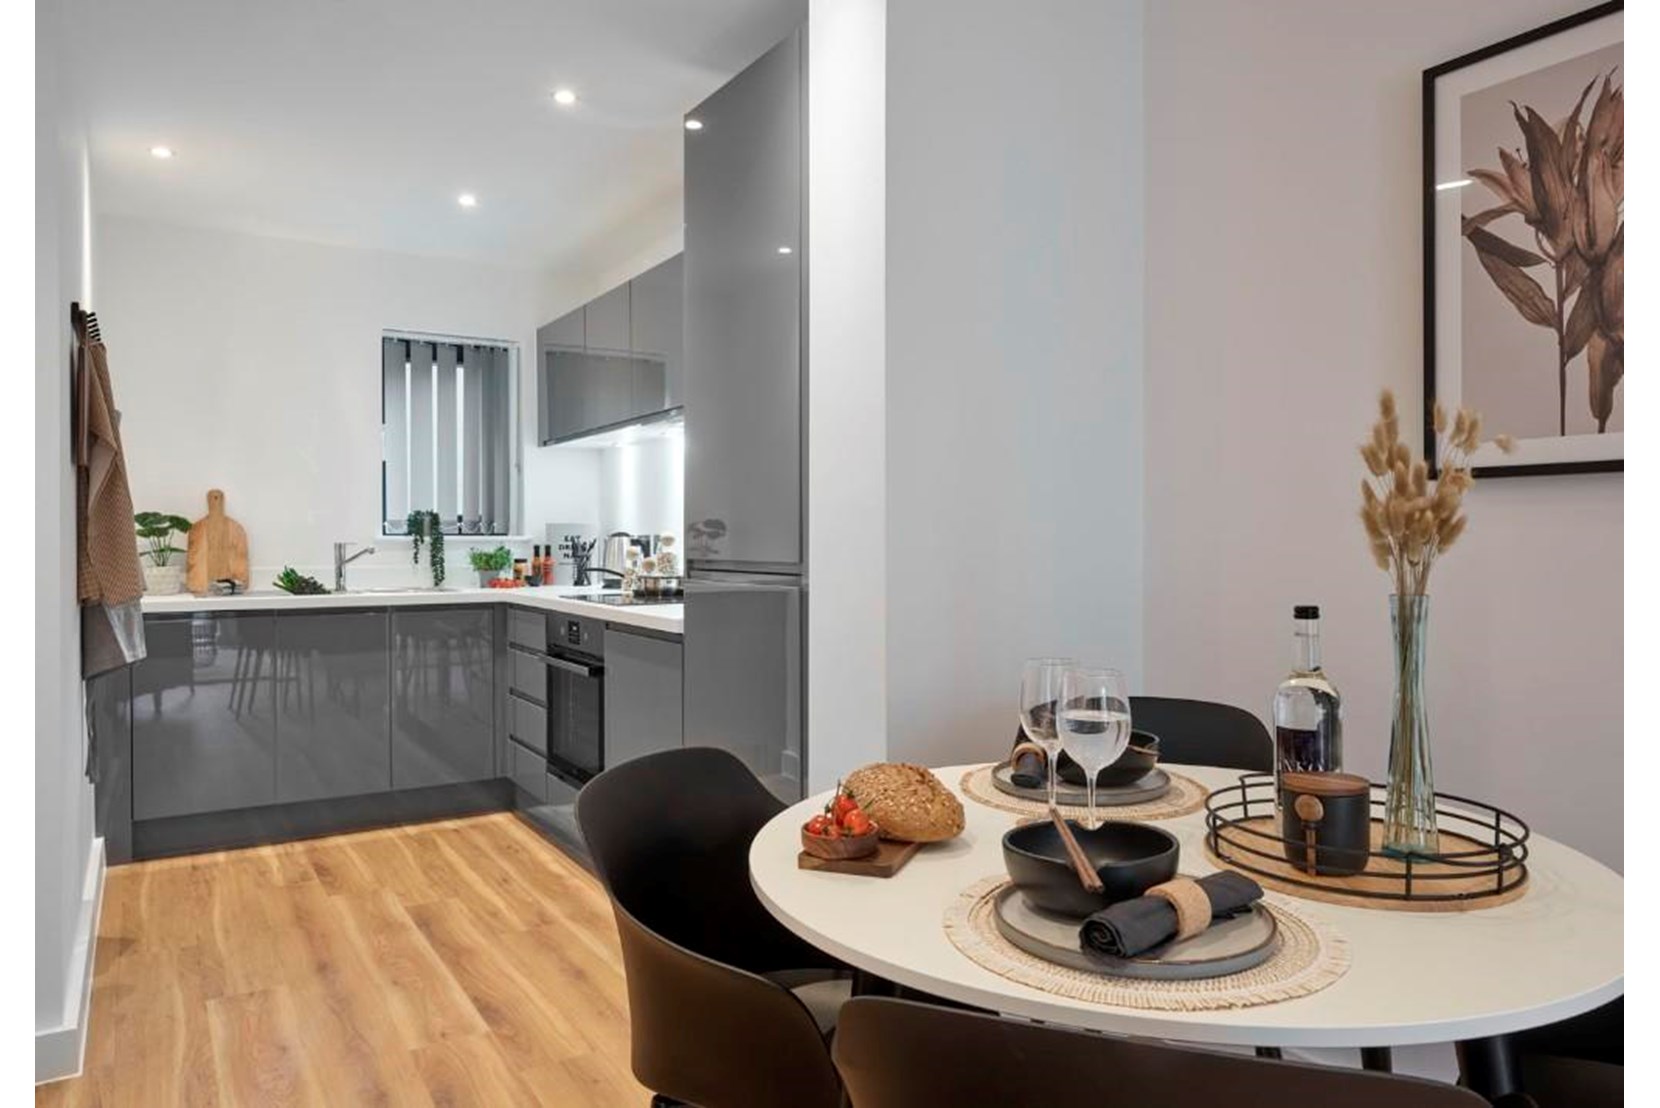 Apartments to Rent by Savills at The Picture House, Redbridge, IG1, dining kitchen area